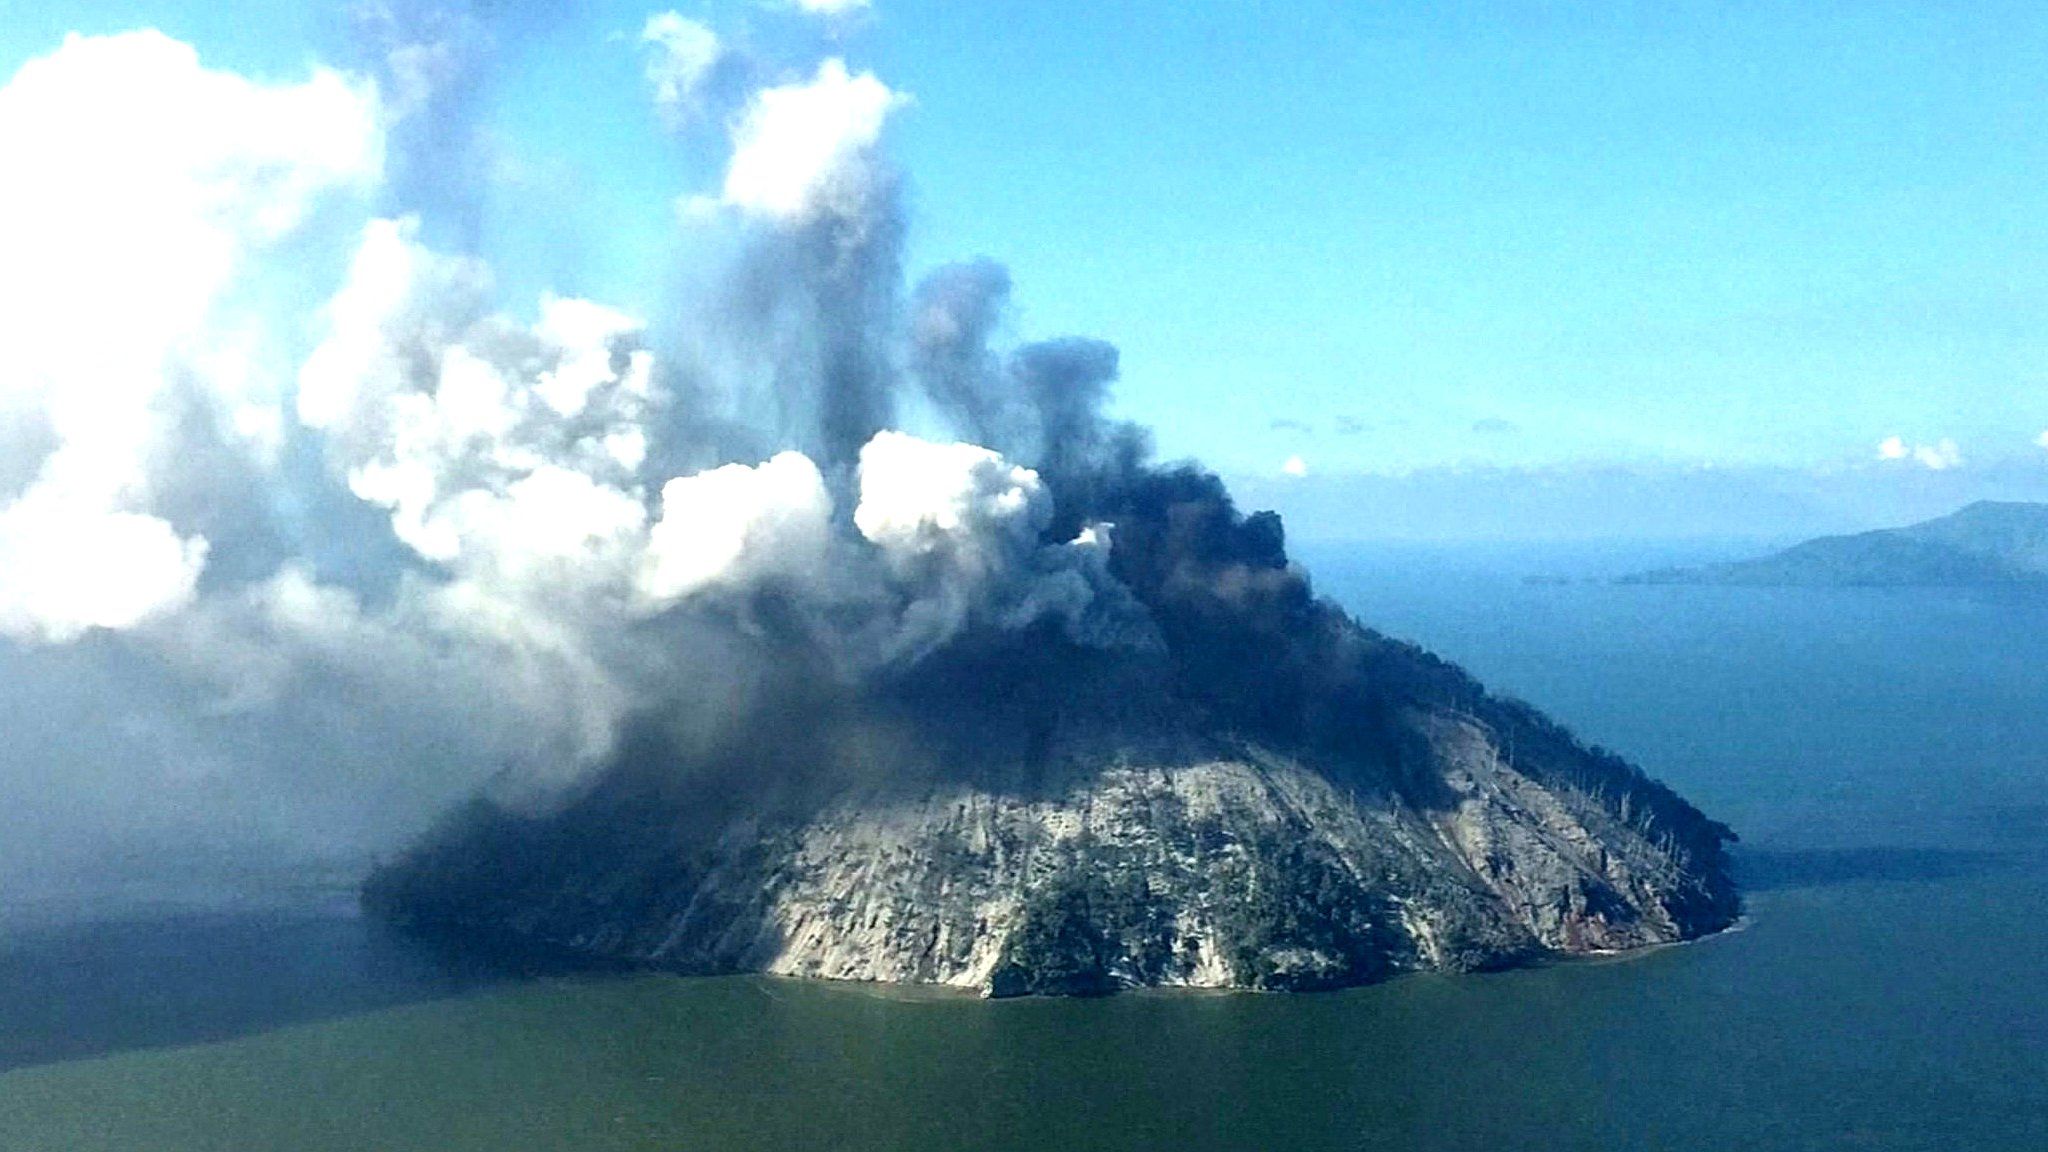 The remote island volcano of Kadovar spews ash into the sky in Papua New Guinea, January 6, 2018